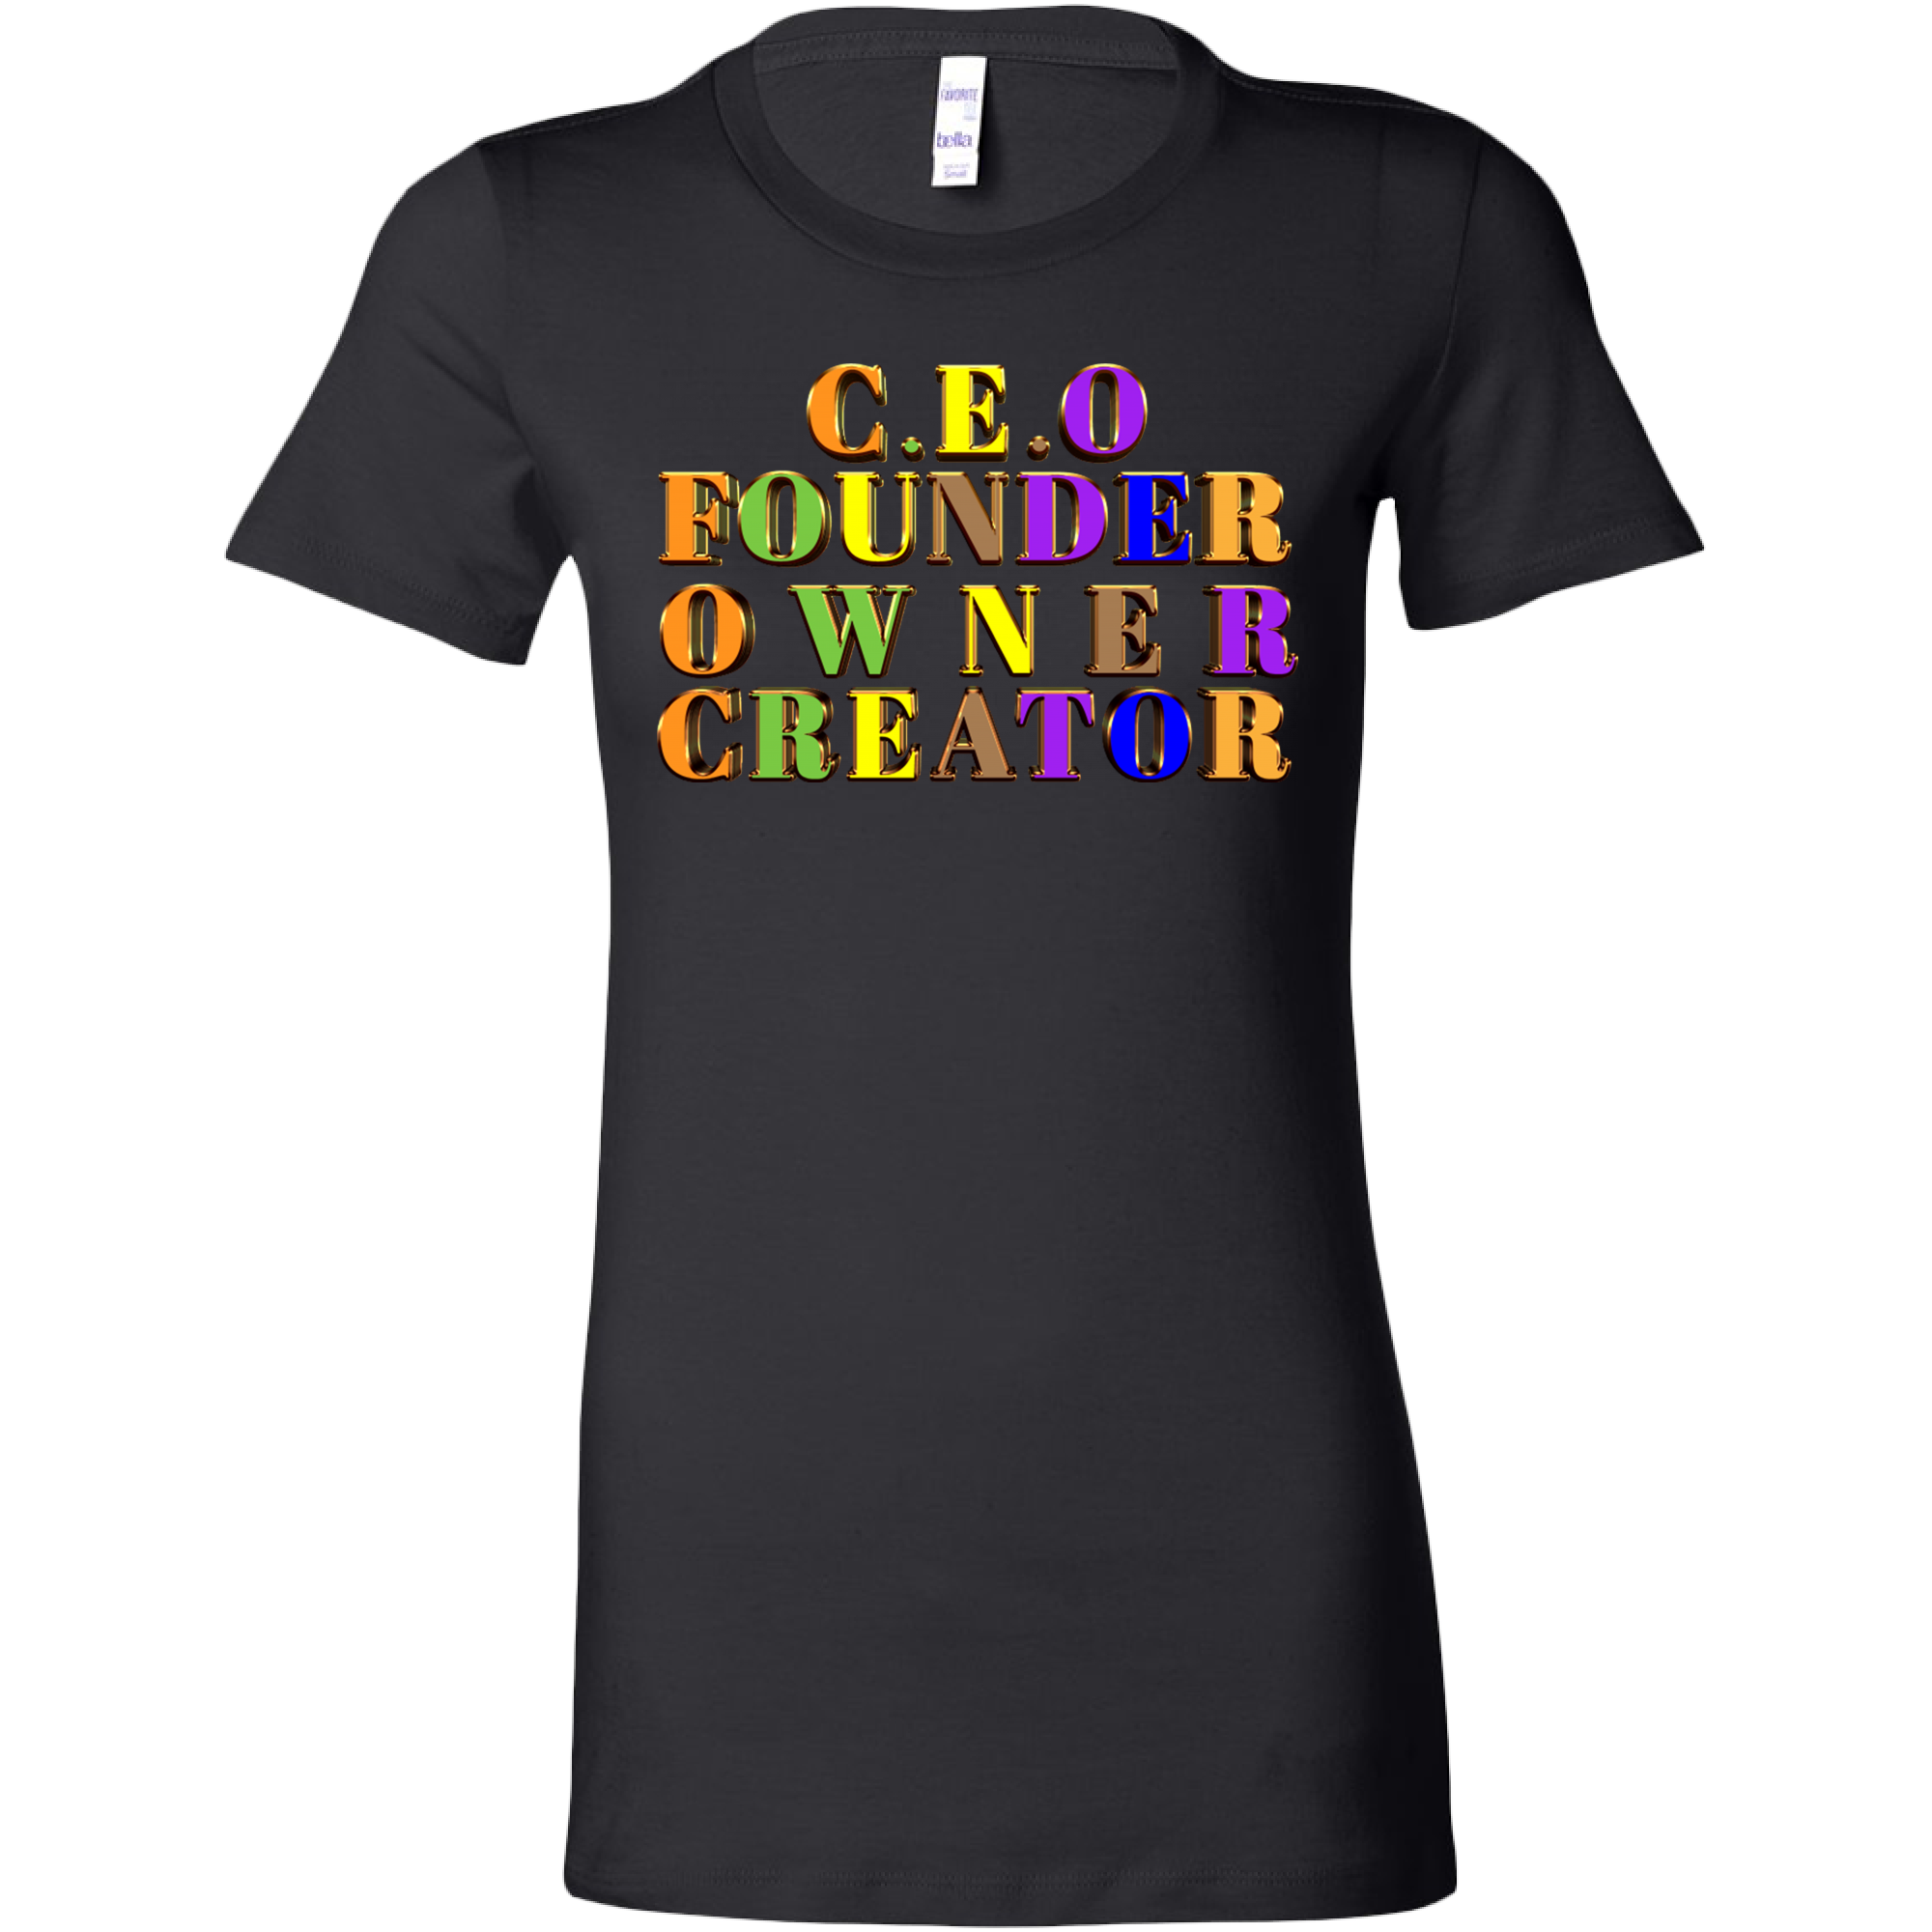 Combo for Him and Her - CEO/FOUNDER/OWNER/CREATOR